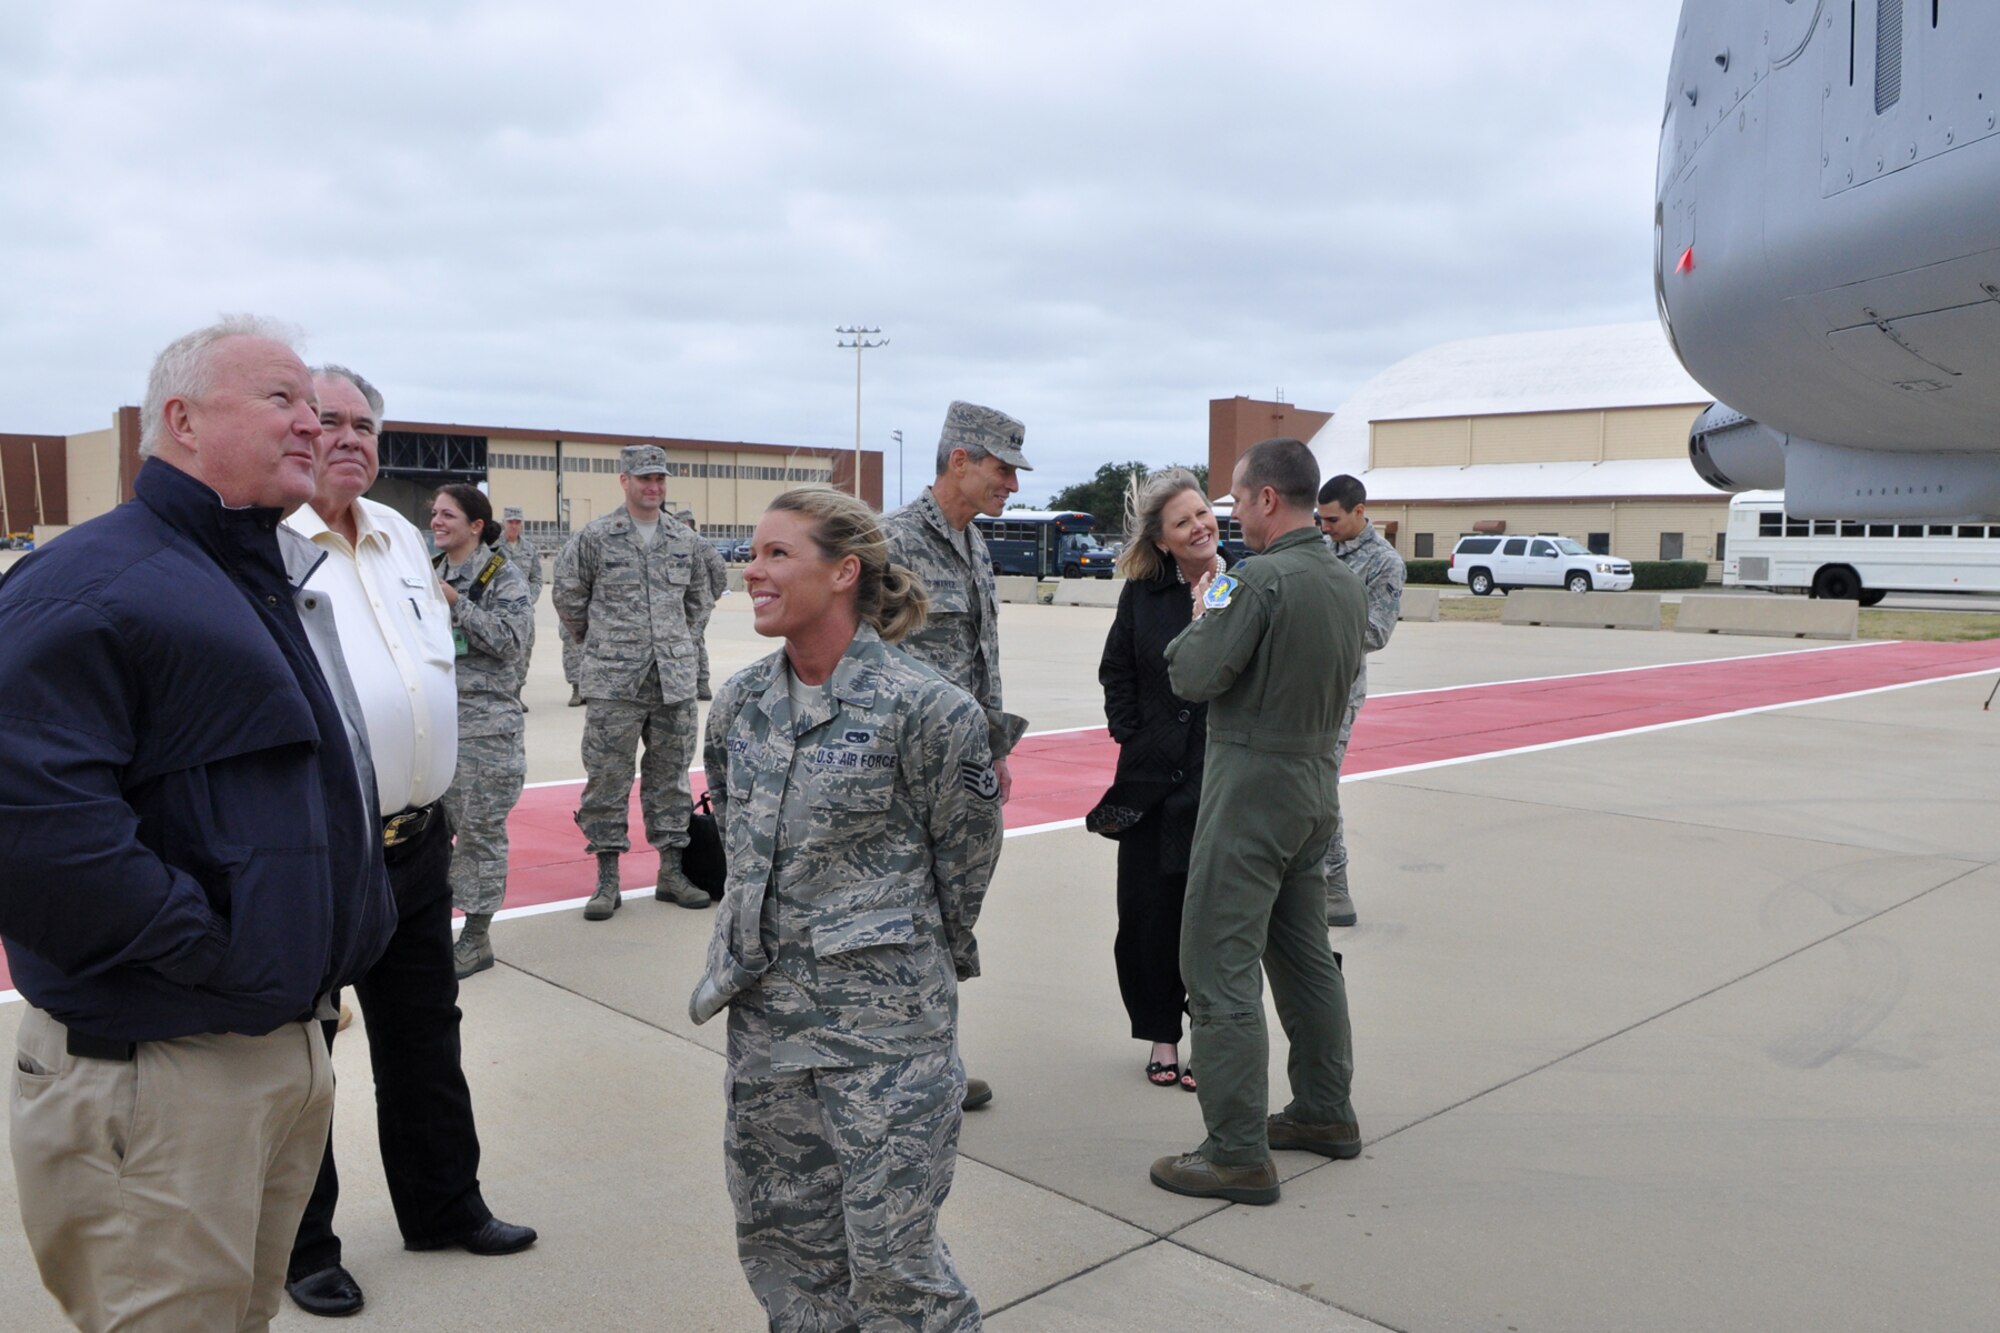 Lt. Col. James Travis, commander of the 47th Fighter Squadron, and Staff Sgt. Ricki Welch, a crew chief assigned to the 917th Aircraft Maintenance Squadron, brief civic leaders, as well as Air Force Chief of Staff Gen. Norton Schwartz and his wife Suzie, about the A-10 Thunderbolt II during their visit to Barksdale Air Force Base, La., Oct. 18, 2011. Fifteen civic leaders from across the country were taking part in an Air Force Chief of Staff Civic Leader Program trip, which visited Barksdale AFB Oct. 17-21, 2011. (U.S. Air Force photo/Master Sgt. Jeff Walston/Released)